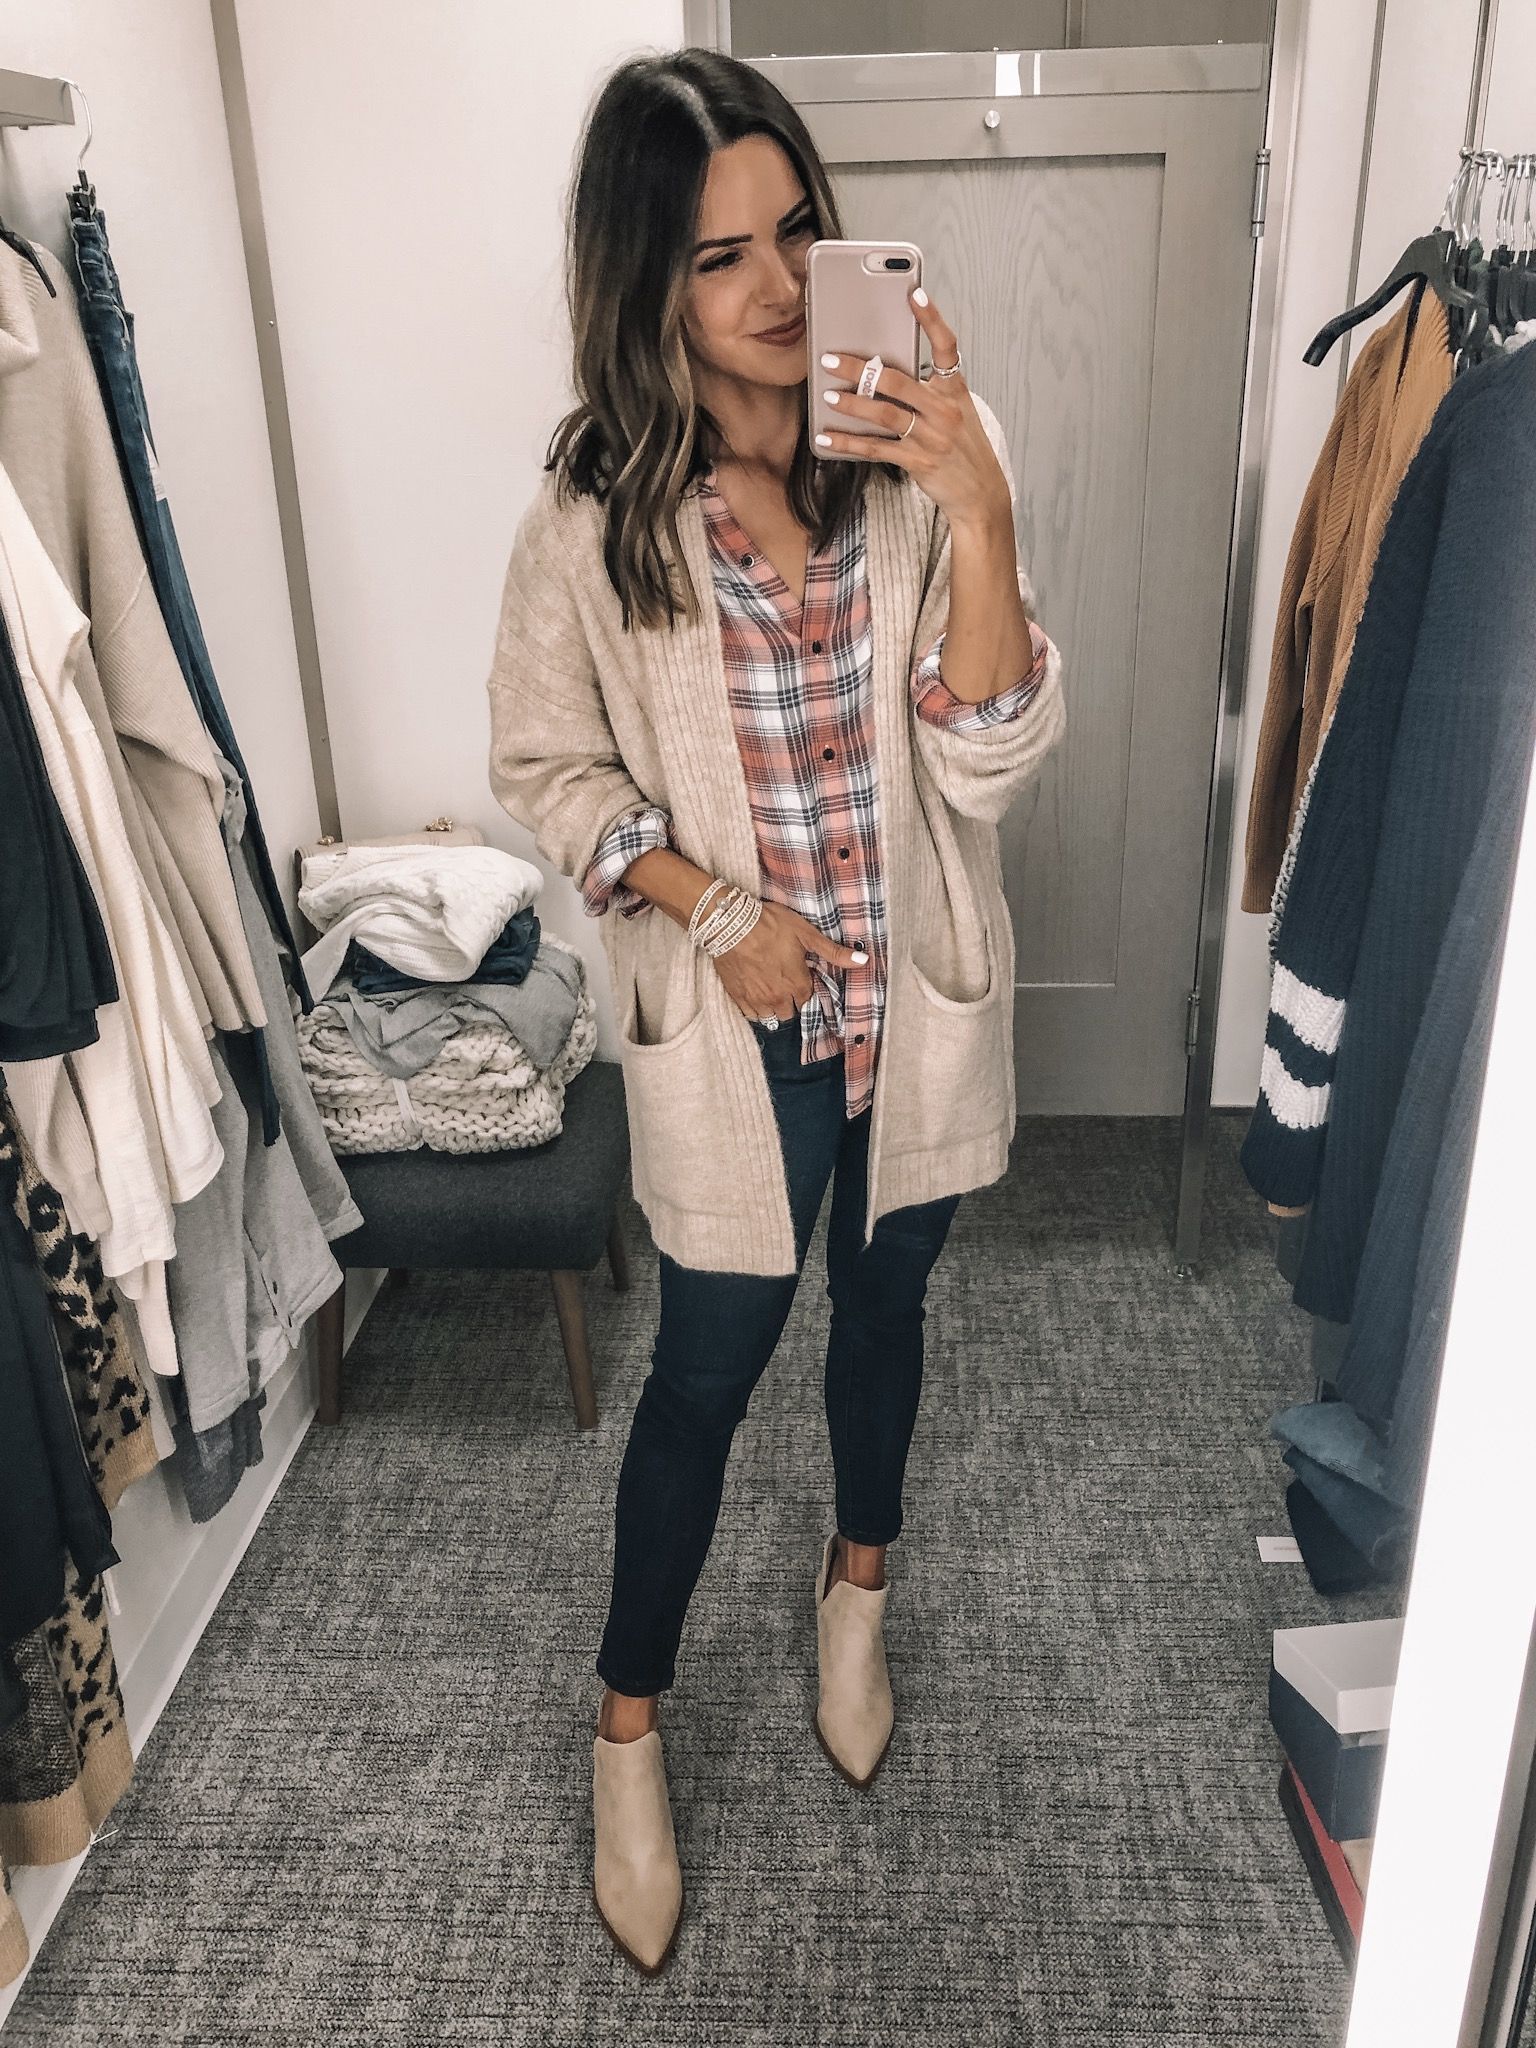 Nordstrom Anniversary Sale Picks & Try On 2019 - The Styled Press - Nordstrom Anniversary Sale Picks & Try On 2019 - The Styled Press -   14 style Inspiration mom ideas